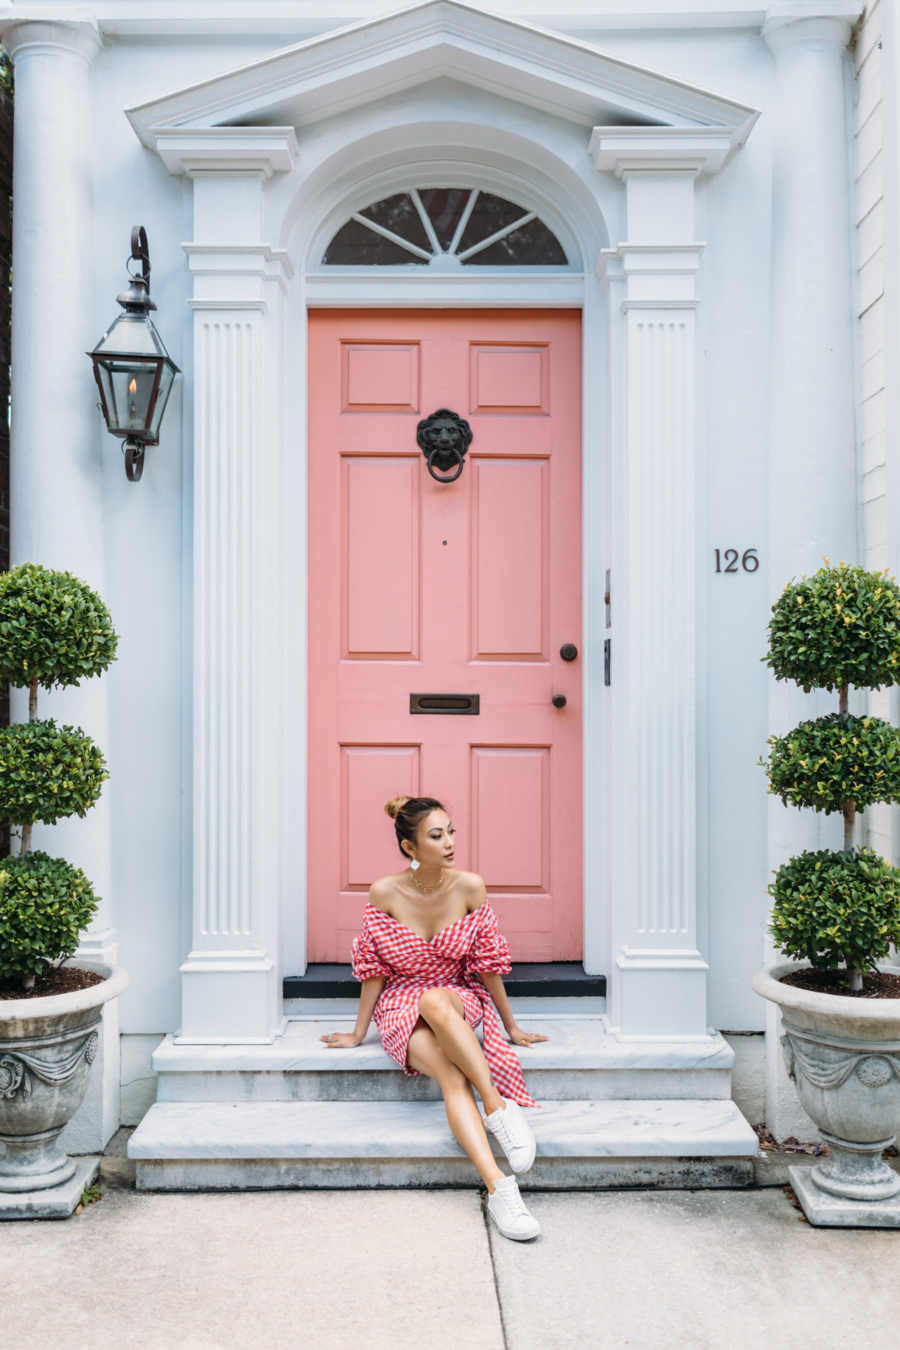 Charleston Pink Door and Red Gingham - Travel Guide: 36 hours in Charleston, SC // NotJessFashion.com